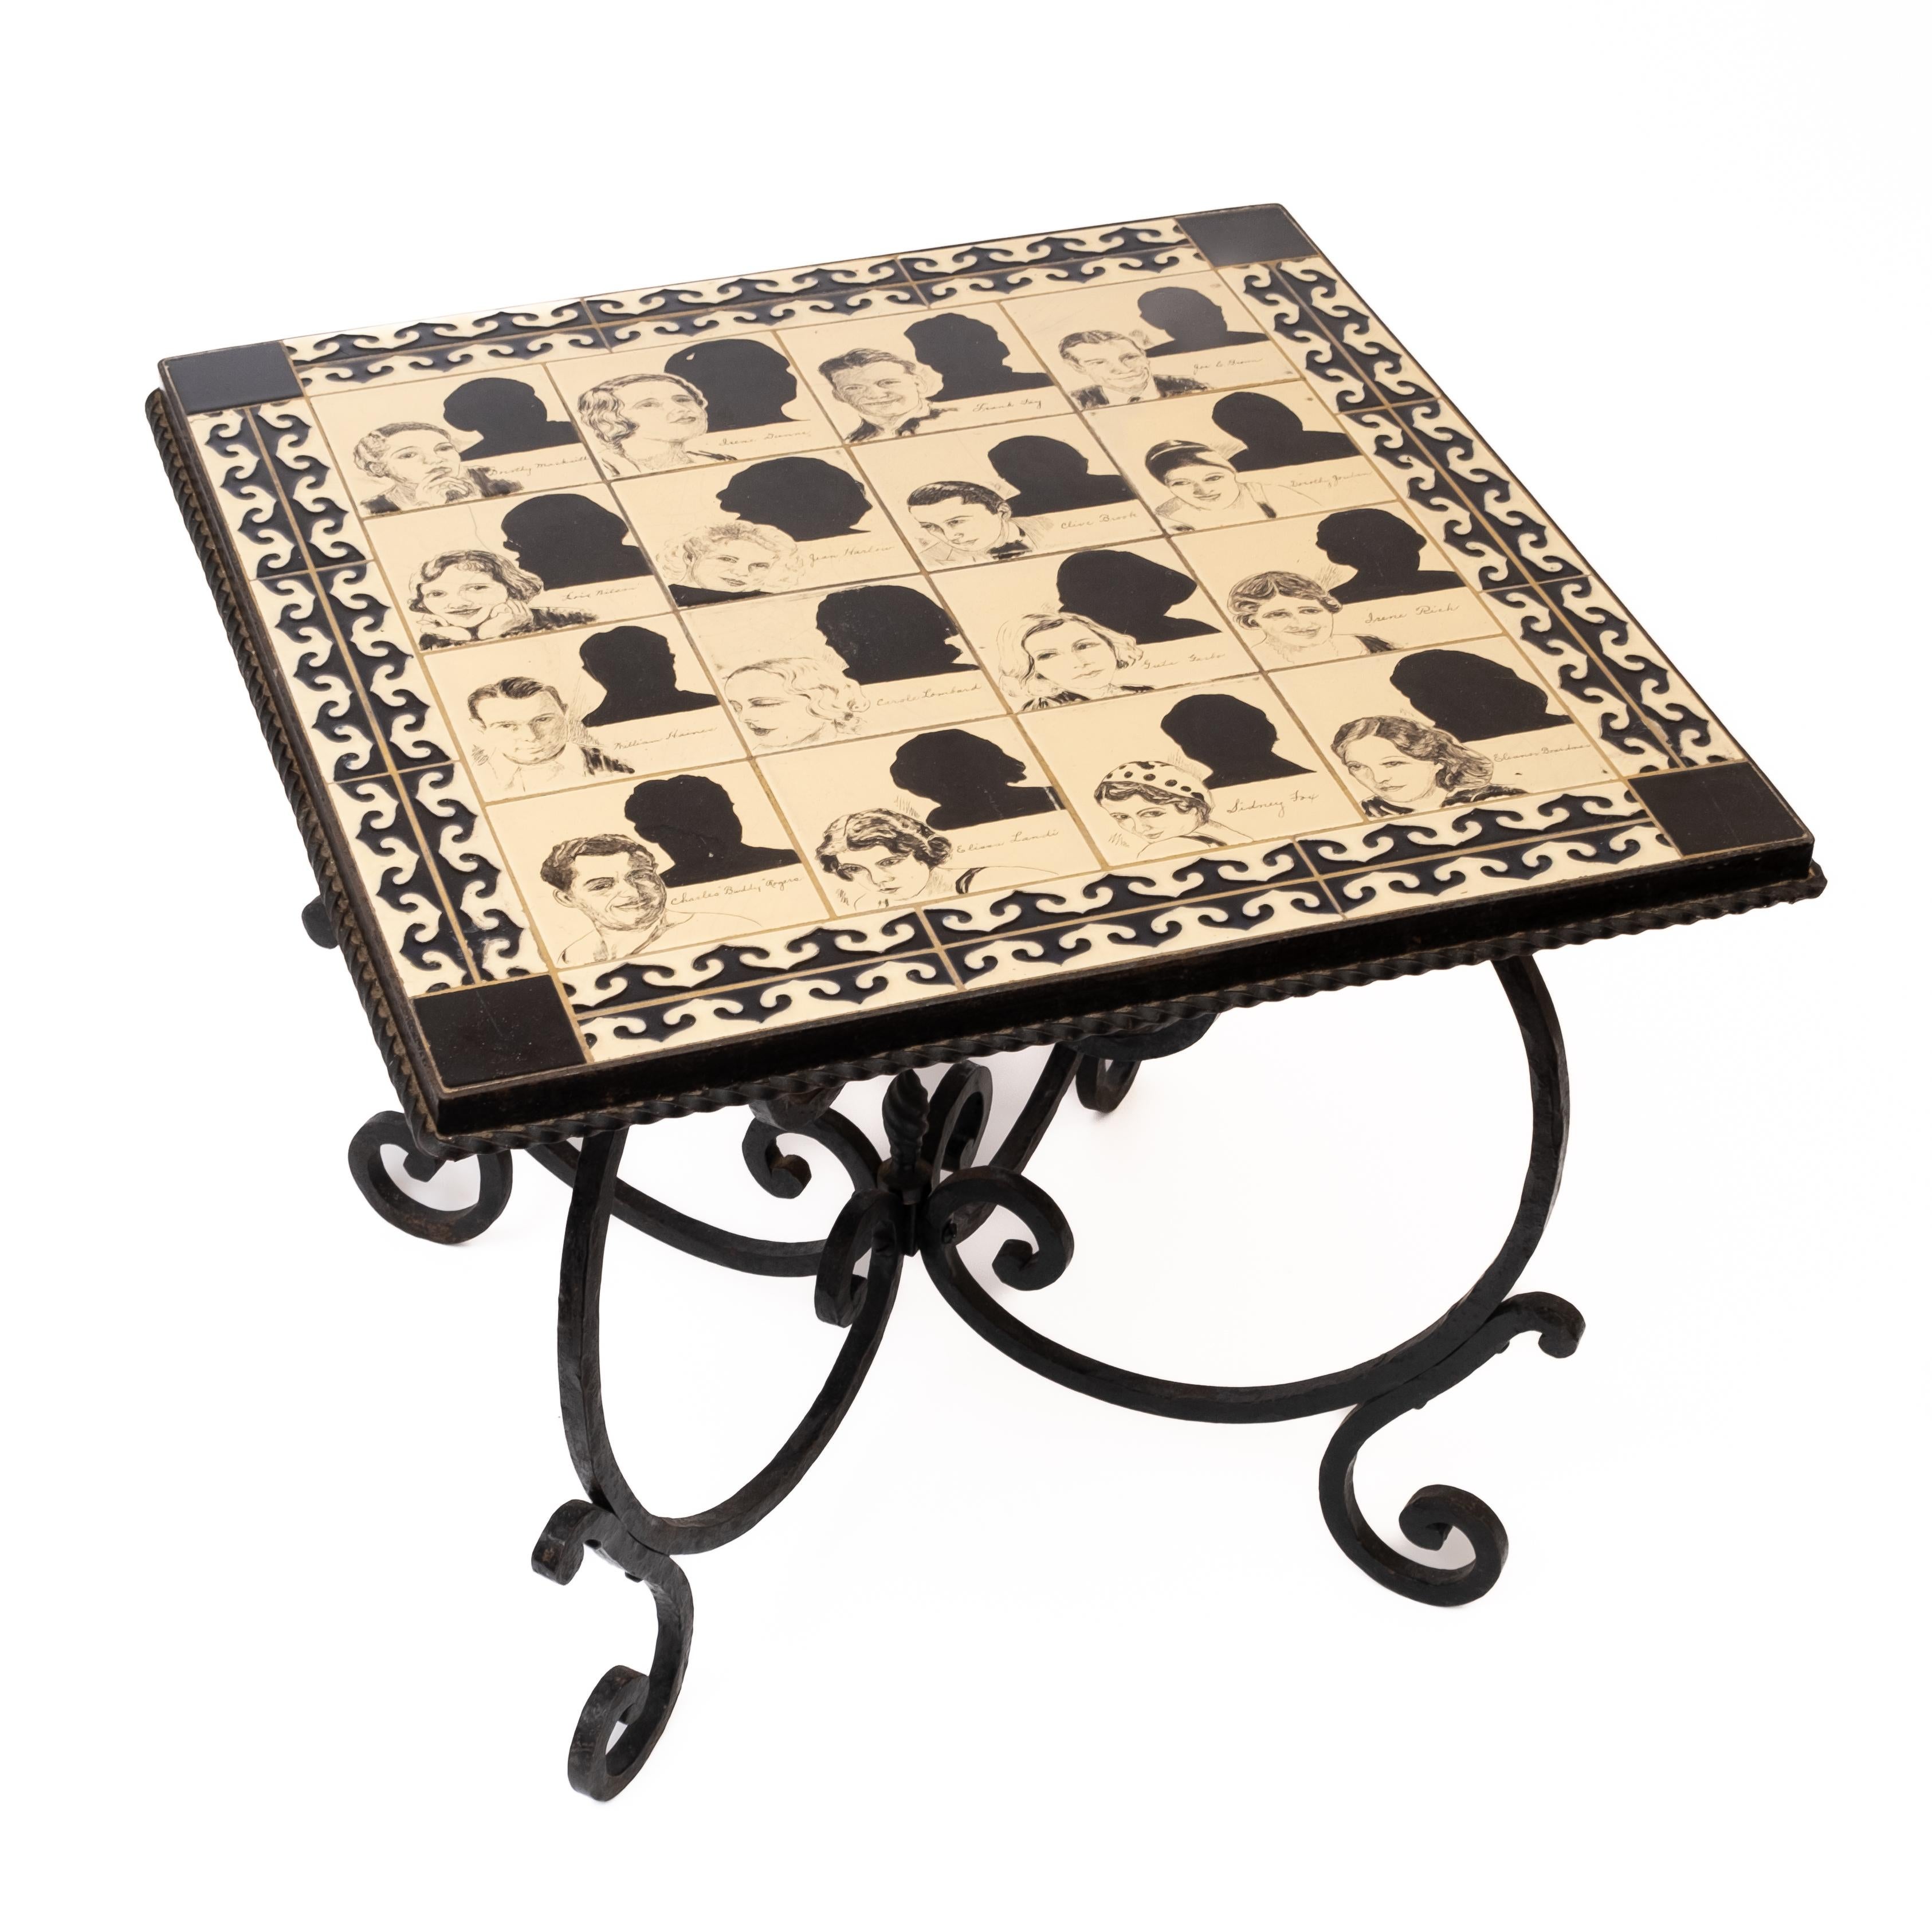 Hand painted vintage tile top wrought iron side depicting hollywood notables. Vintage tile-top, wrought iron side/cocktail table. A unique nostalgic tribute to the screen stars of the pre-World War II entertainment industry. No visible